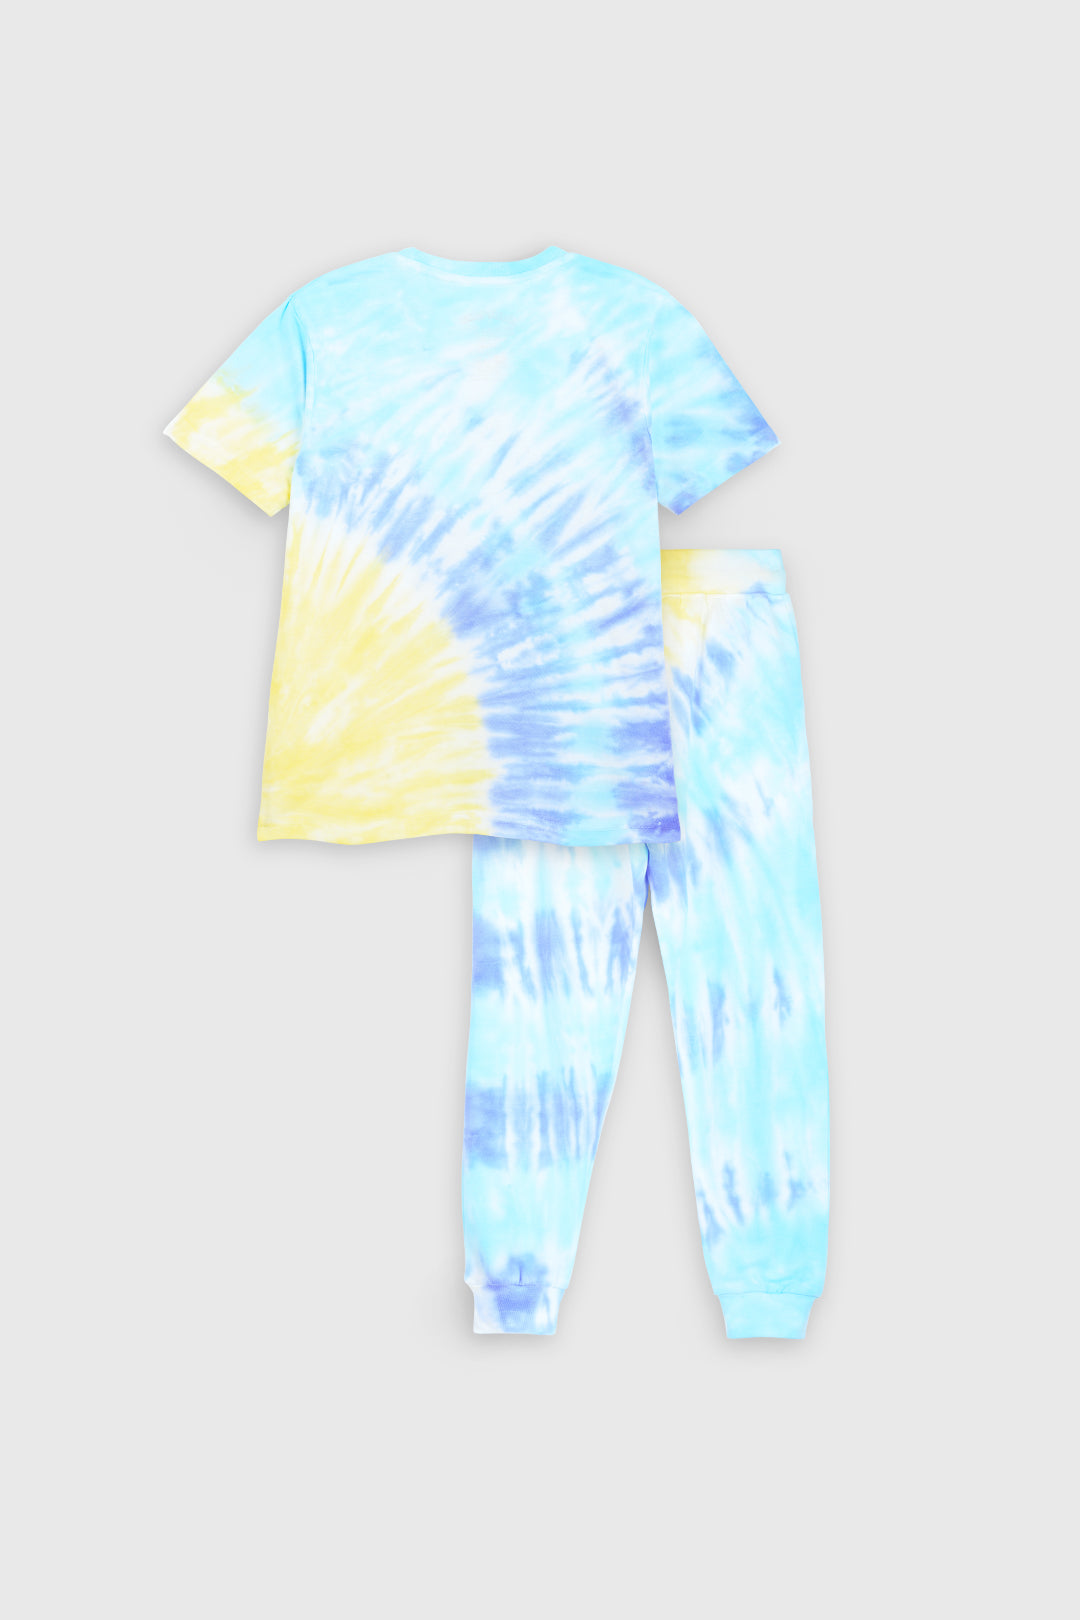 Bugs Bunny Tie & Dye Co-Ord Set for Family